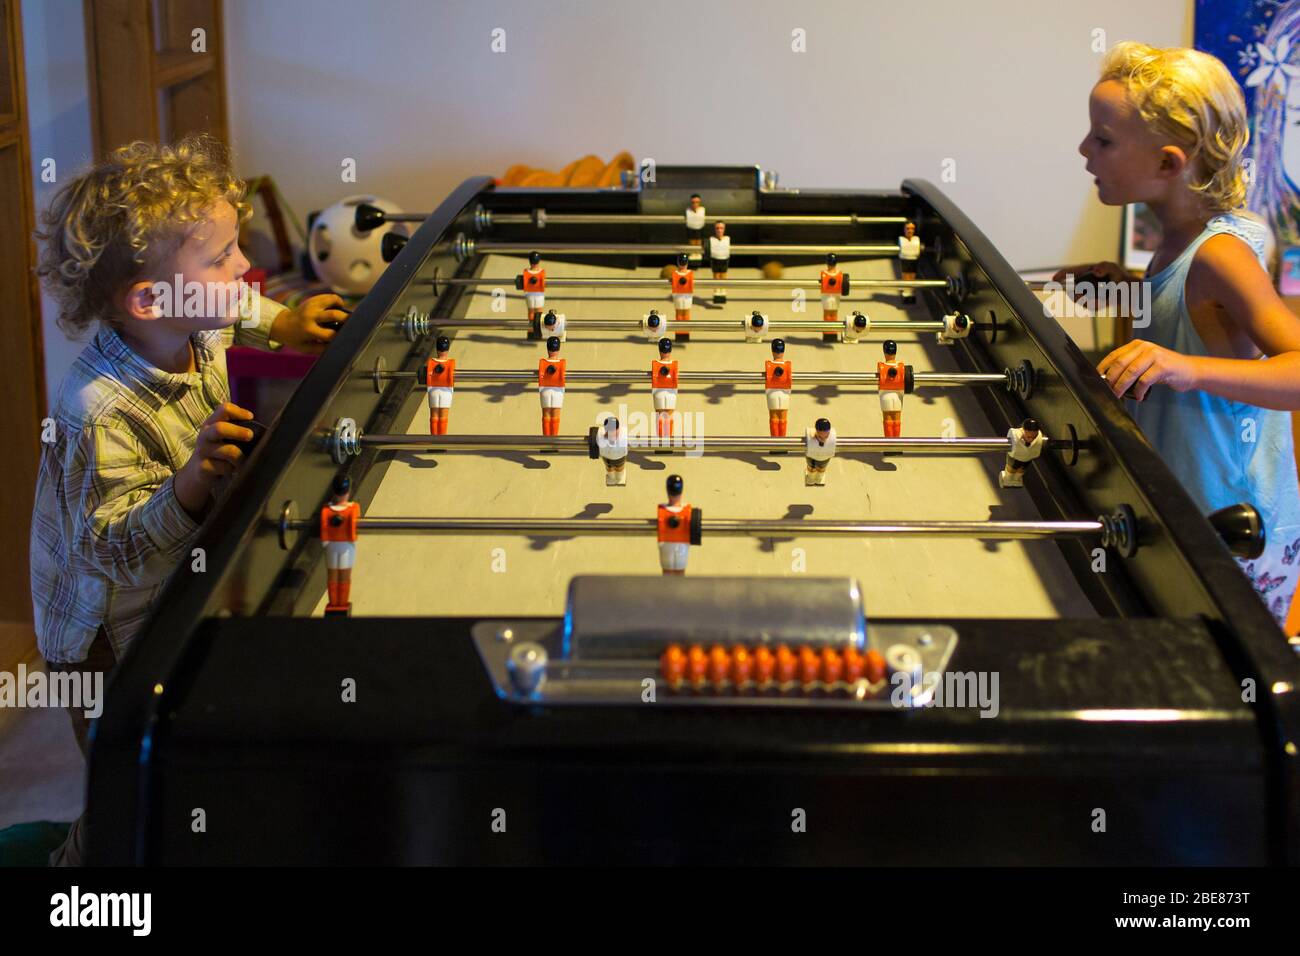 A brother and sister amuse themselves indoors playing table football in Etel, France. Stock Photo